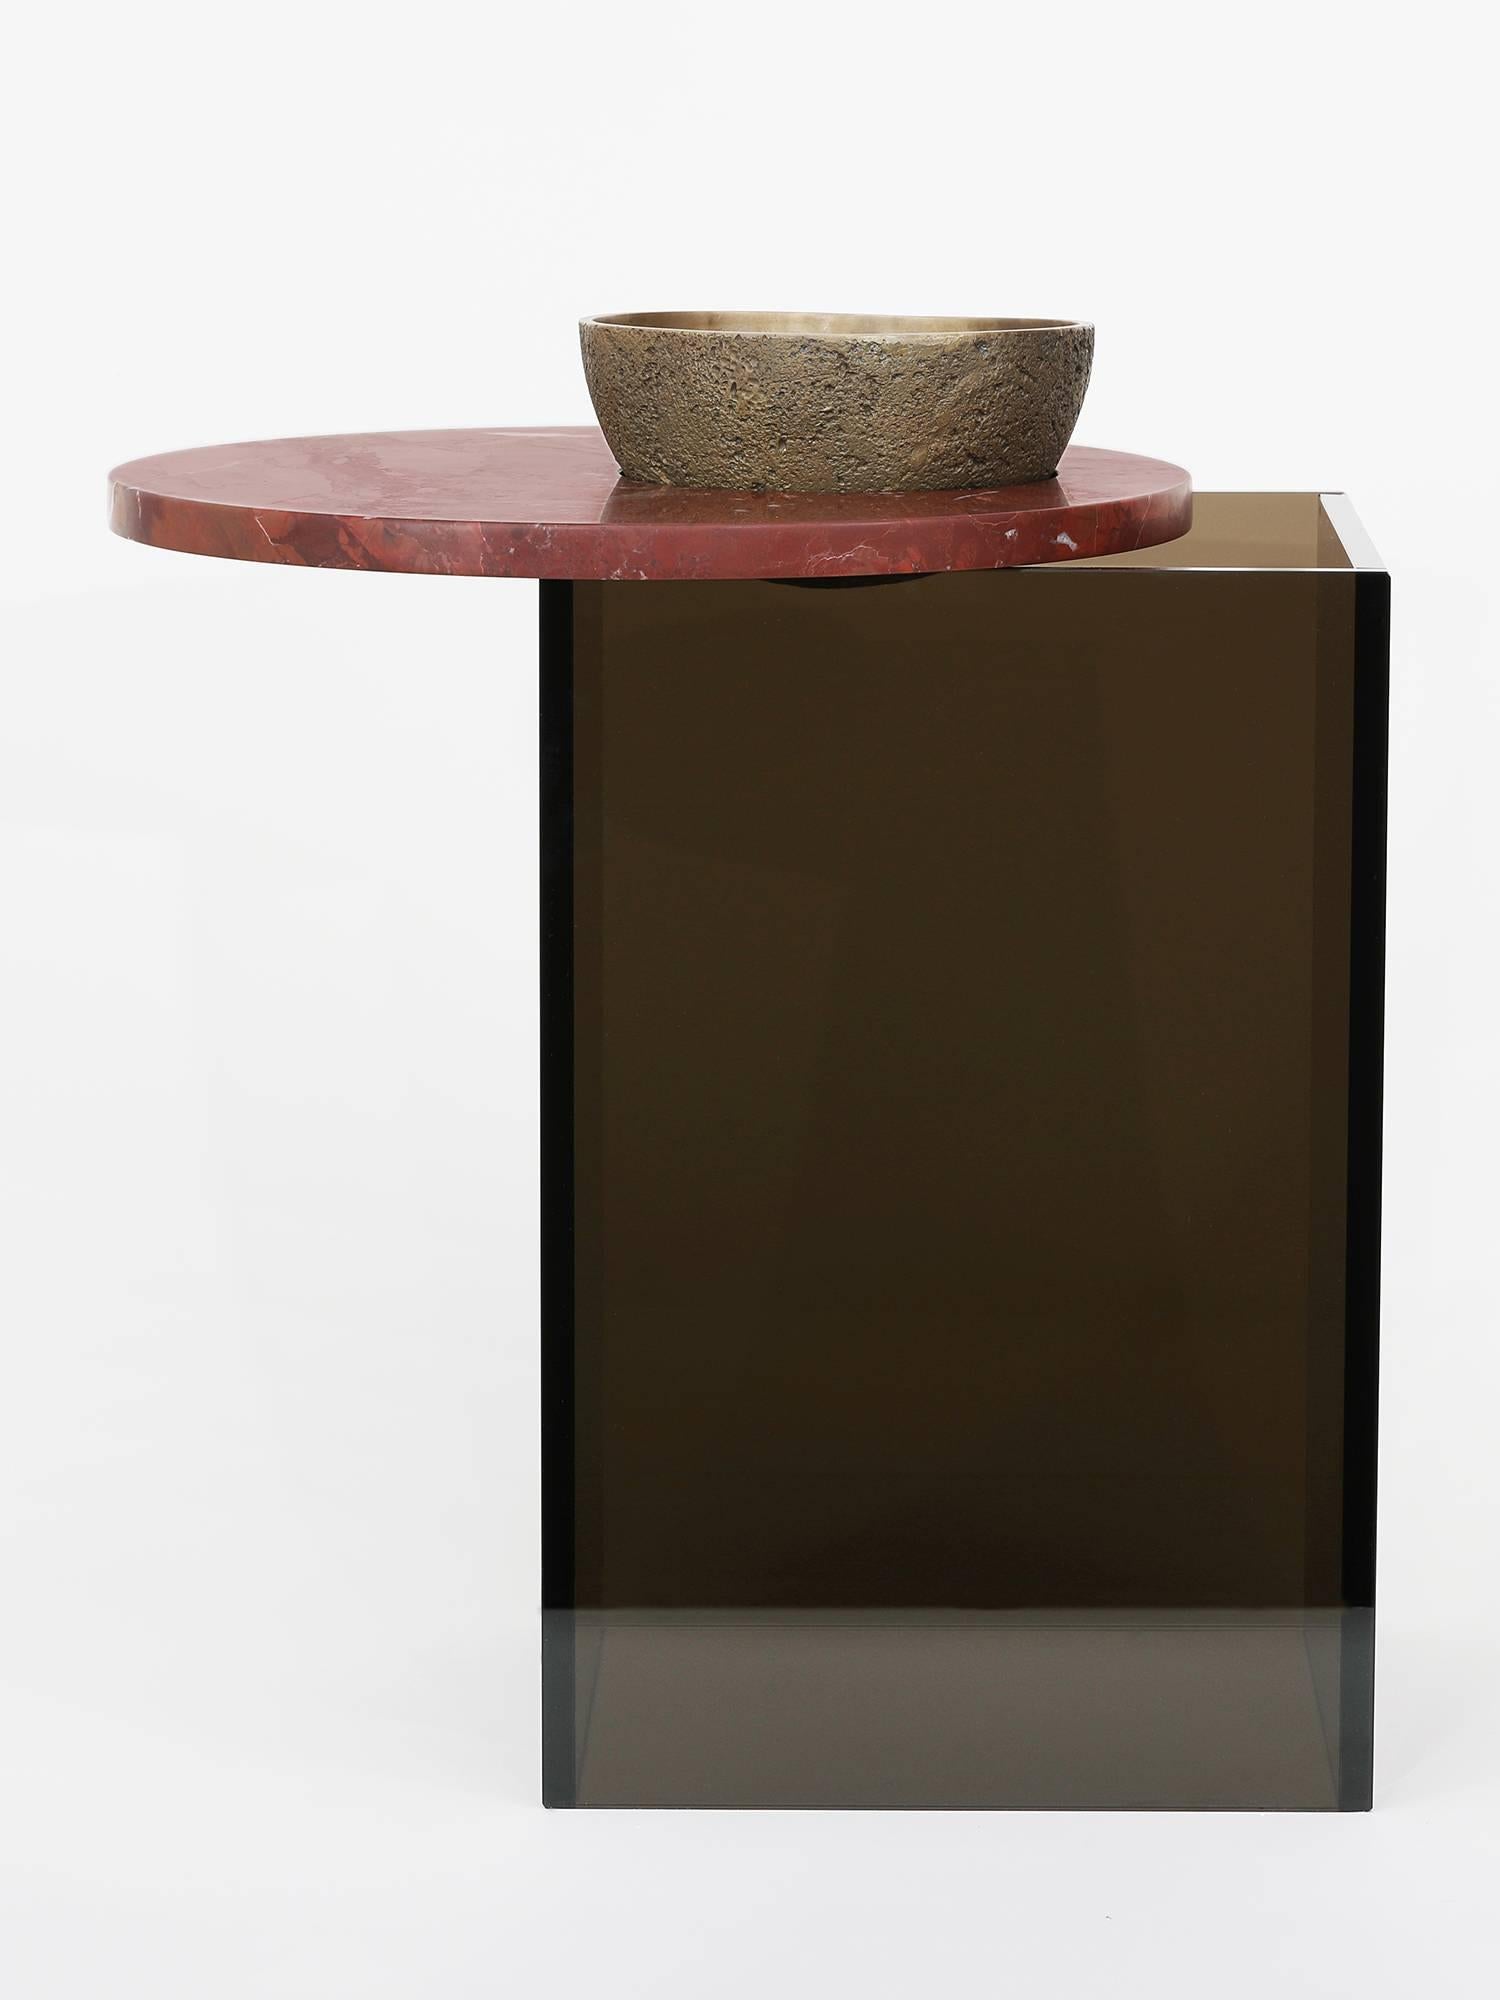 One of three vessels developed as the material maquette's for Brian Thoreen's larger works. Comprised of a cast bronze bowl, red marble top and bronze glass base. The height of a small side table or large tabletop vessel. Also available in brown or